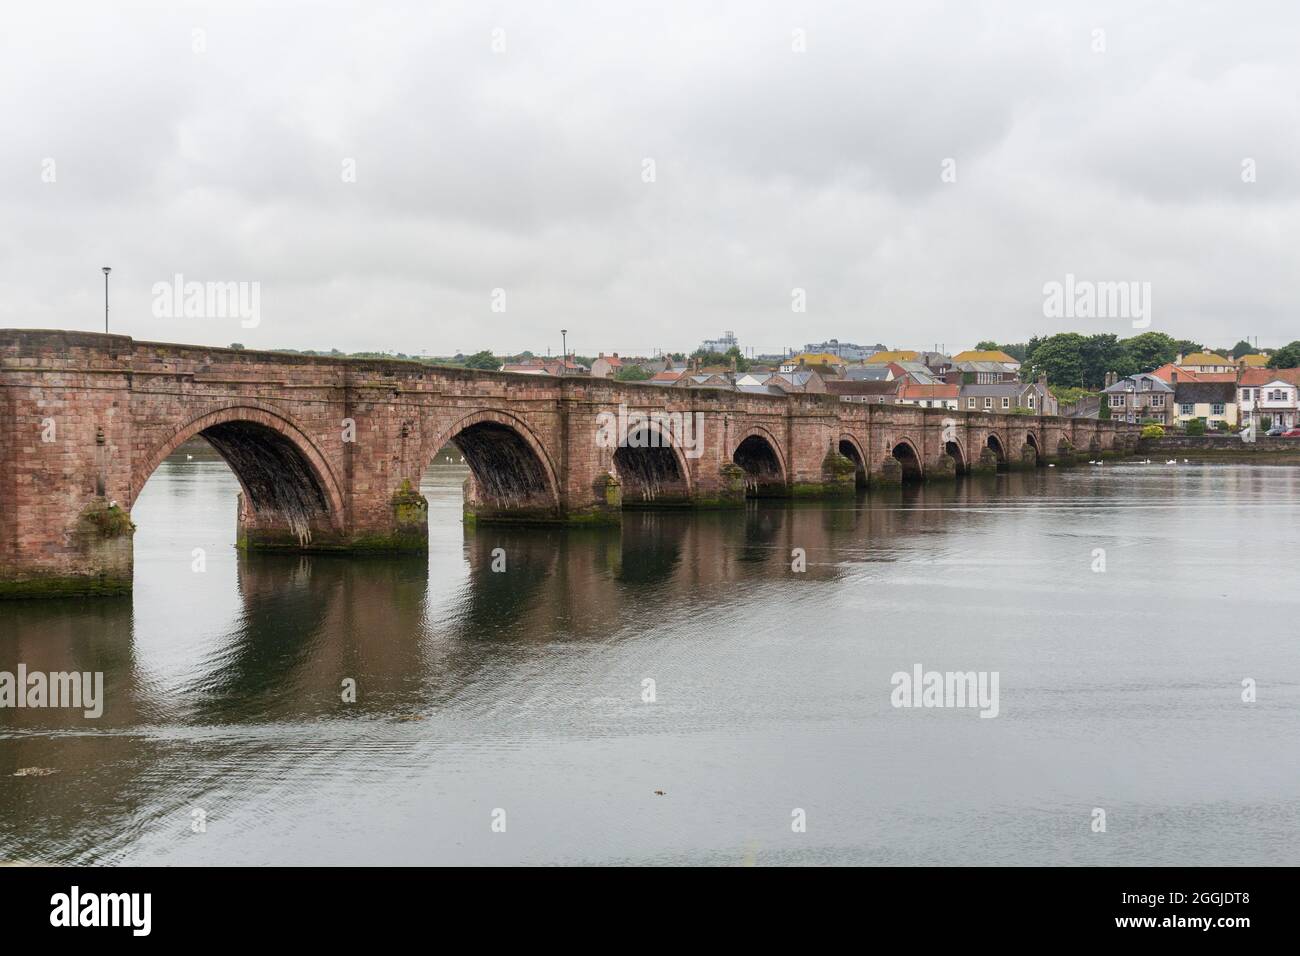 The old bridge at Berwick-upon-Tweed, during the summer of 2014 Stock Photo